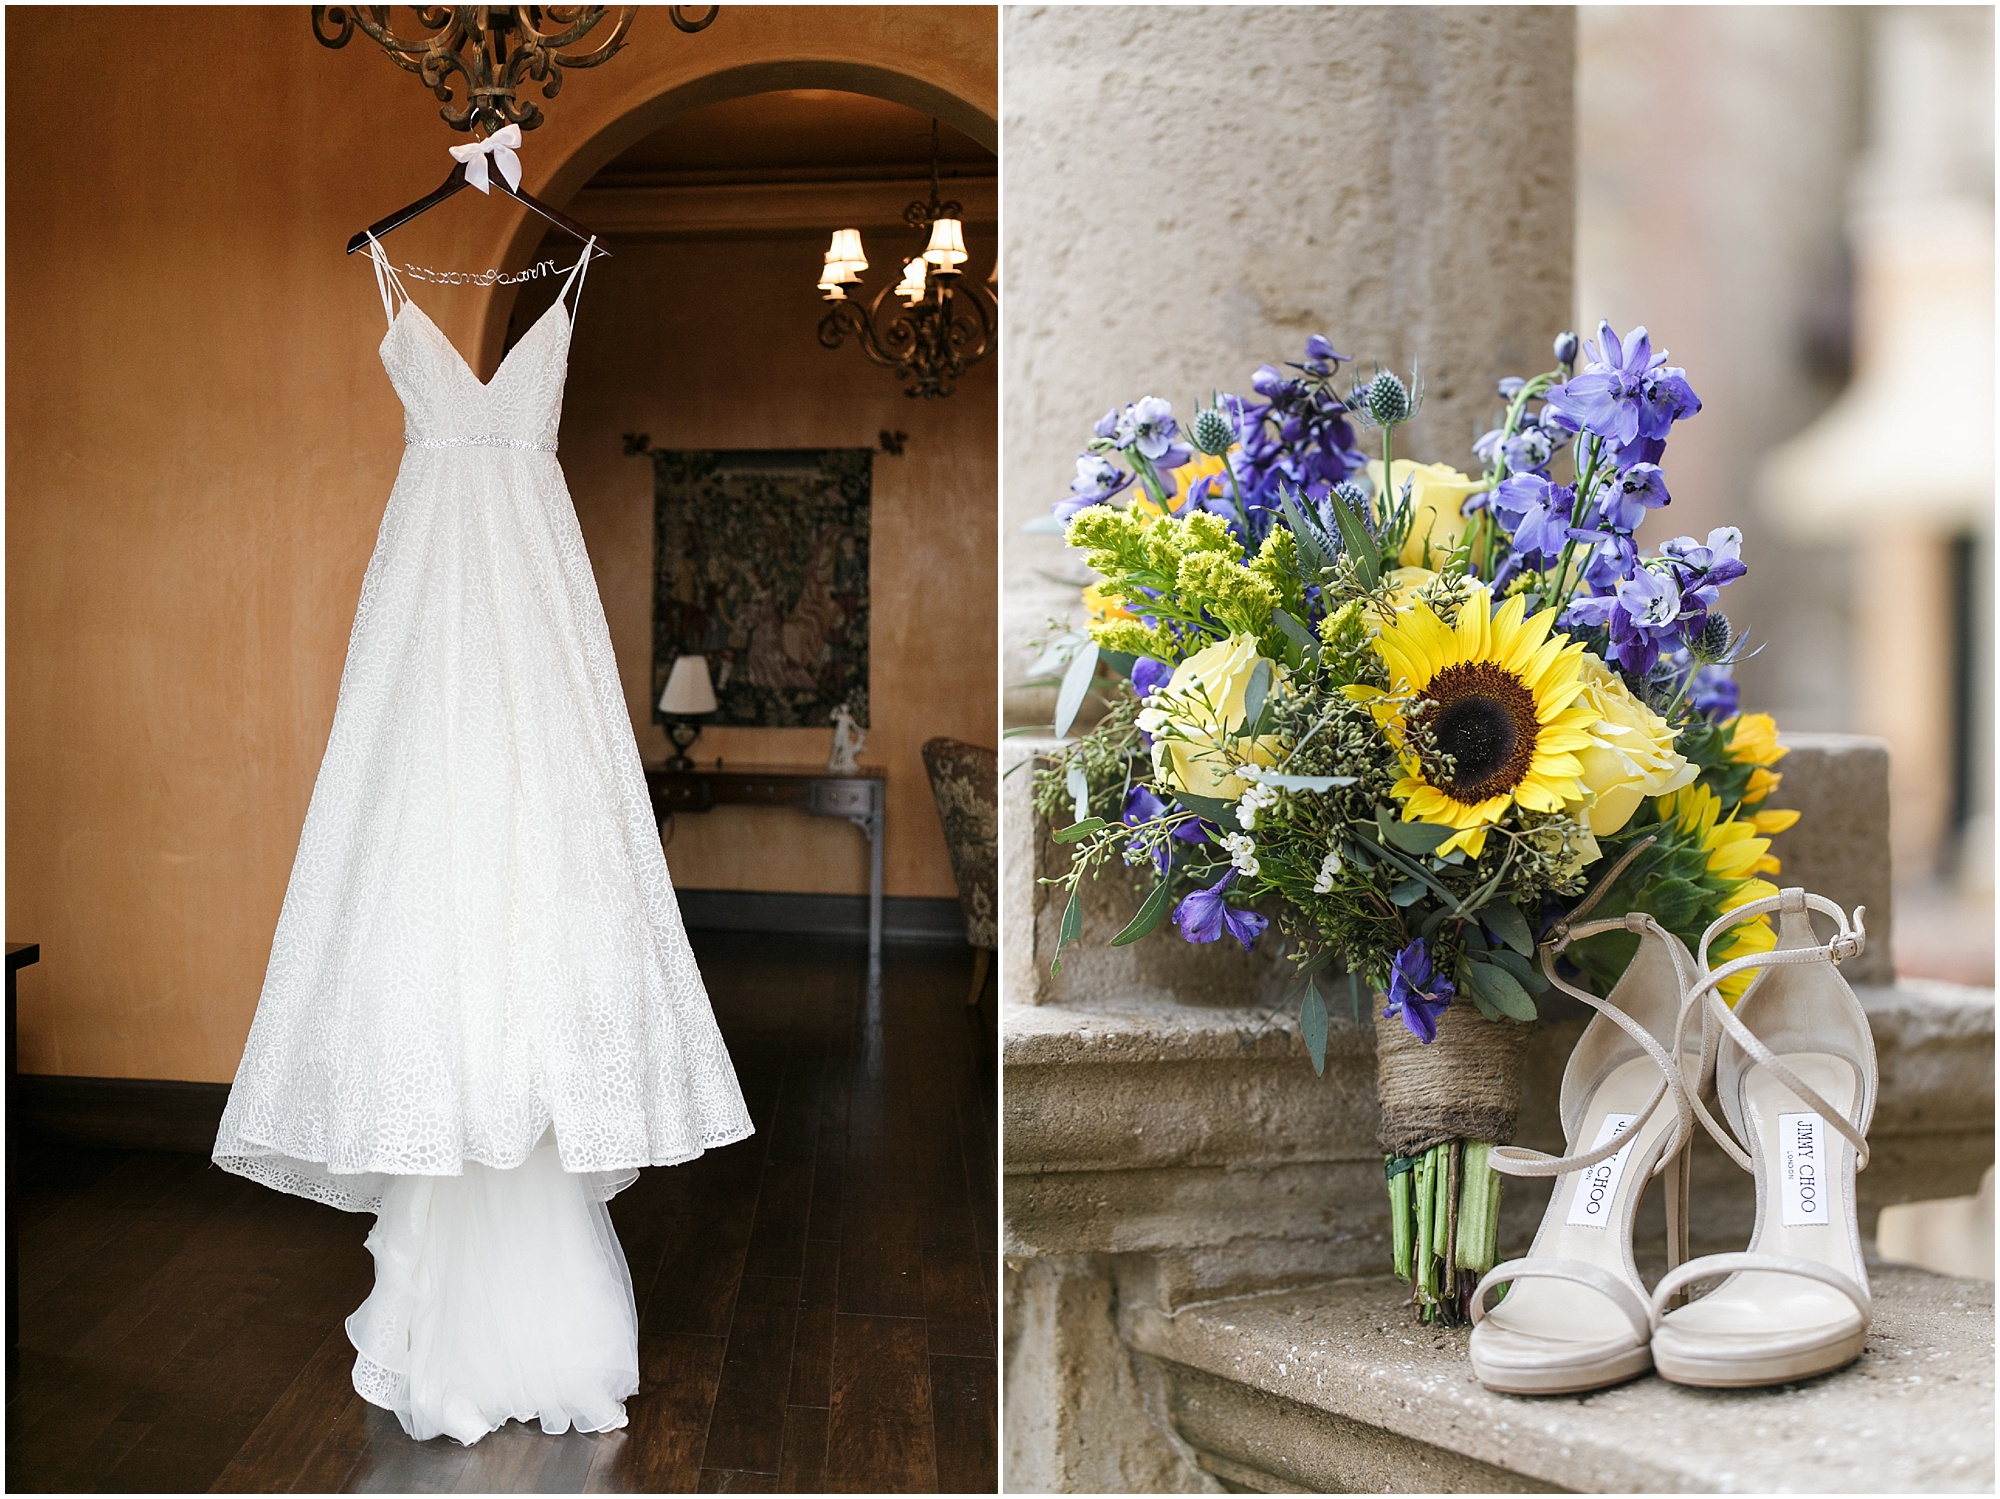 Wedding dress hanging from a chandelier and a sunflower bouquet and shoes. 